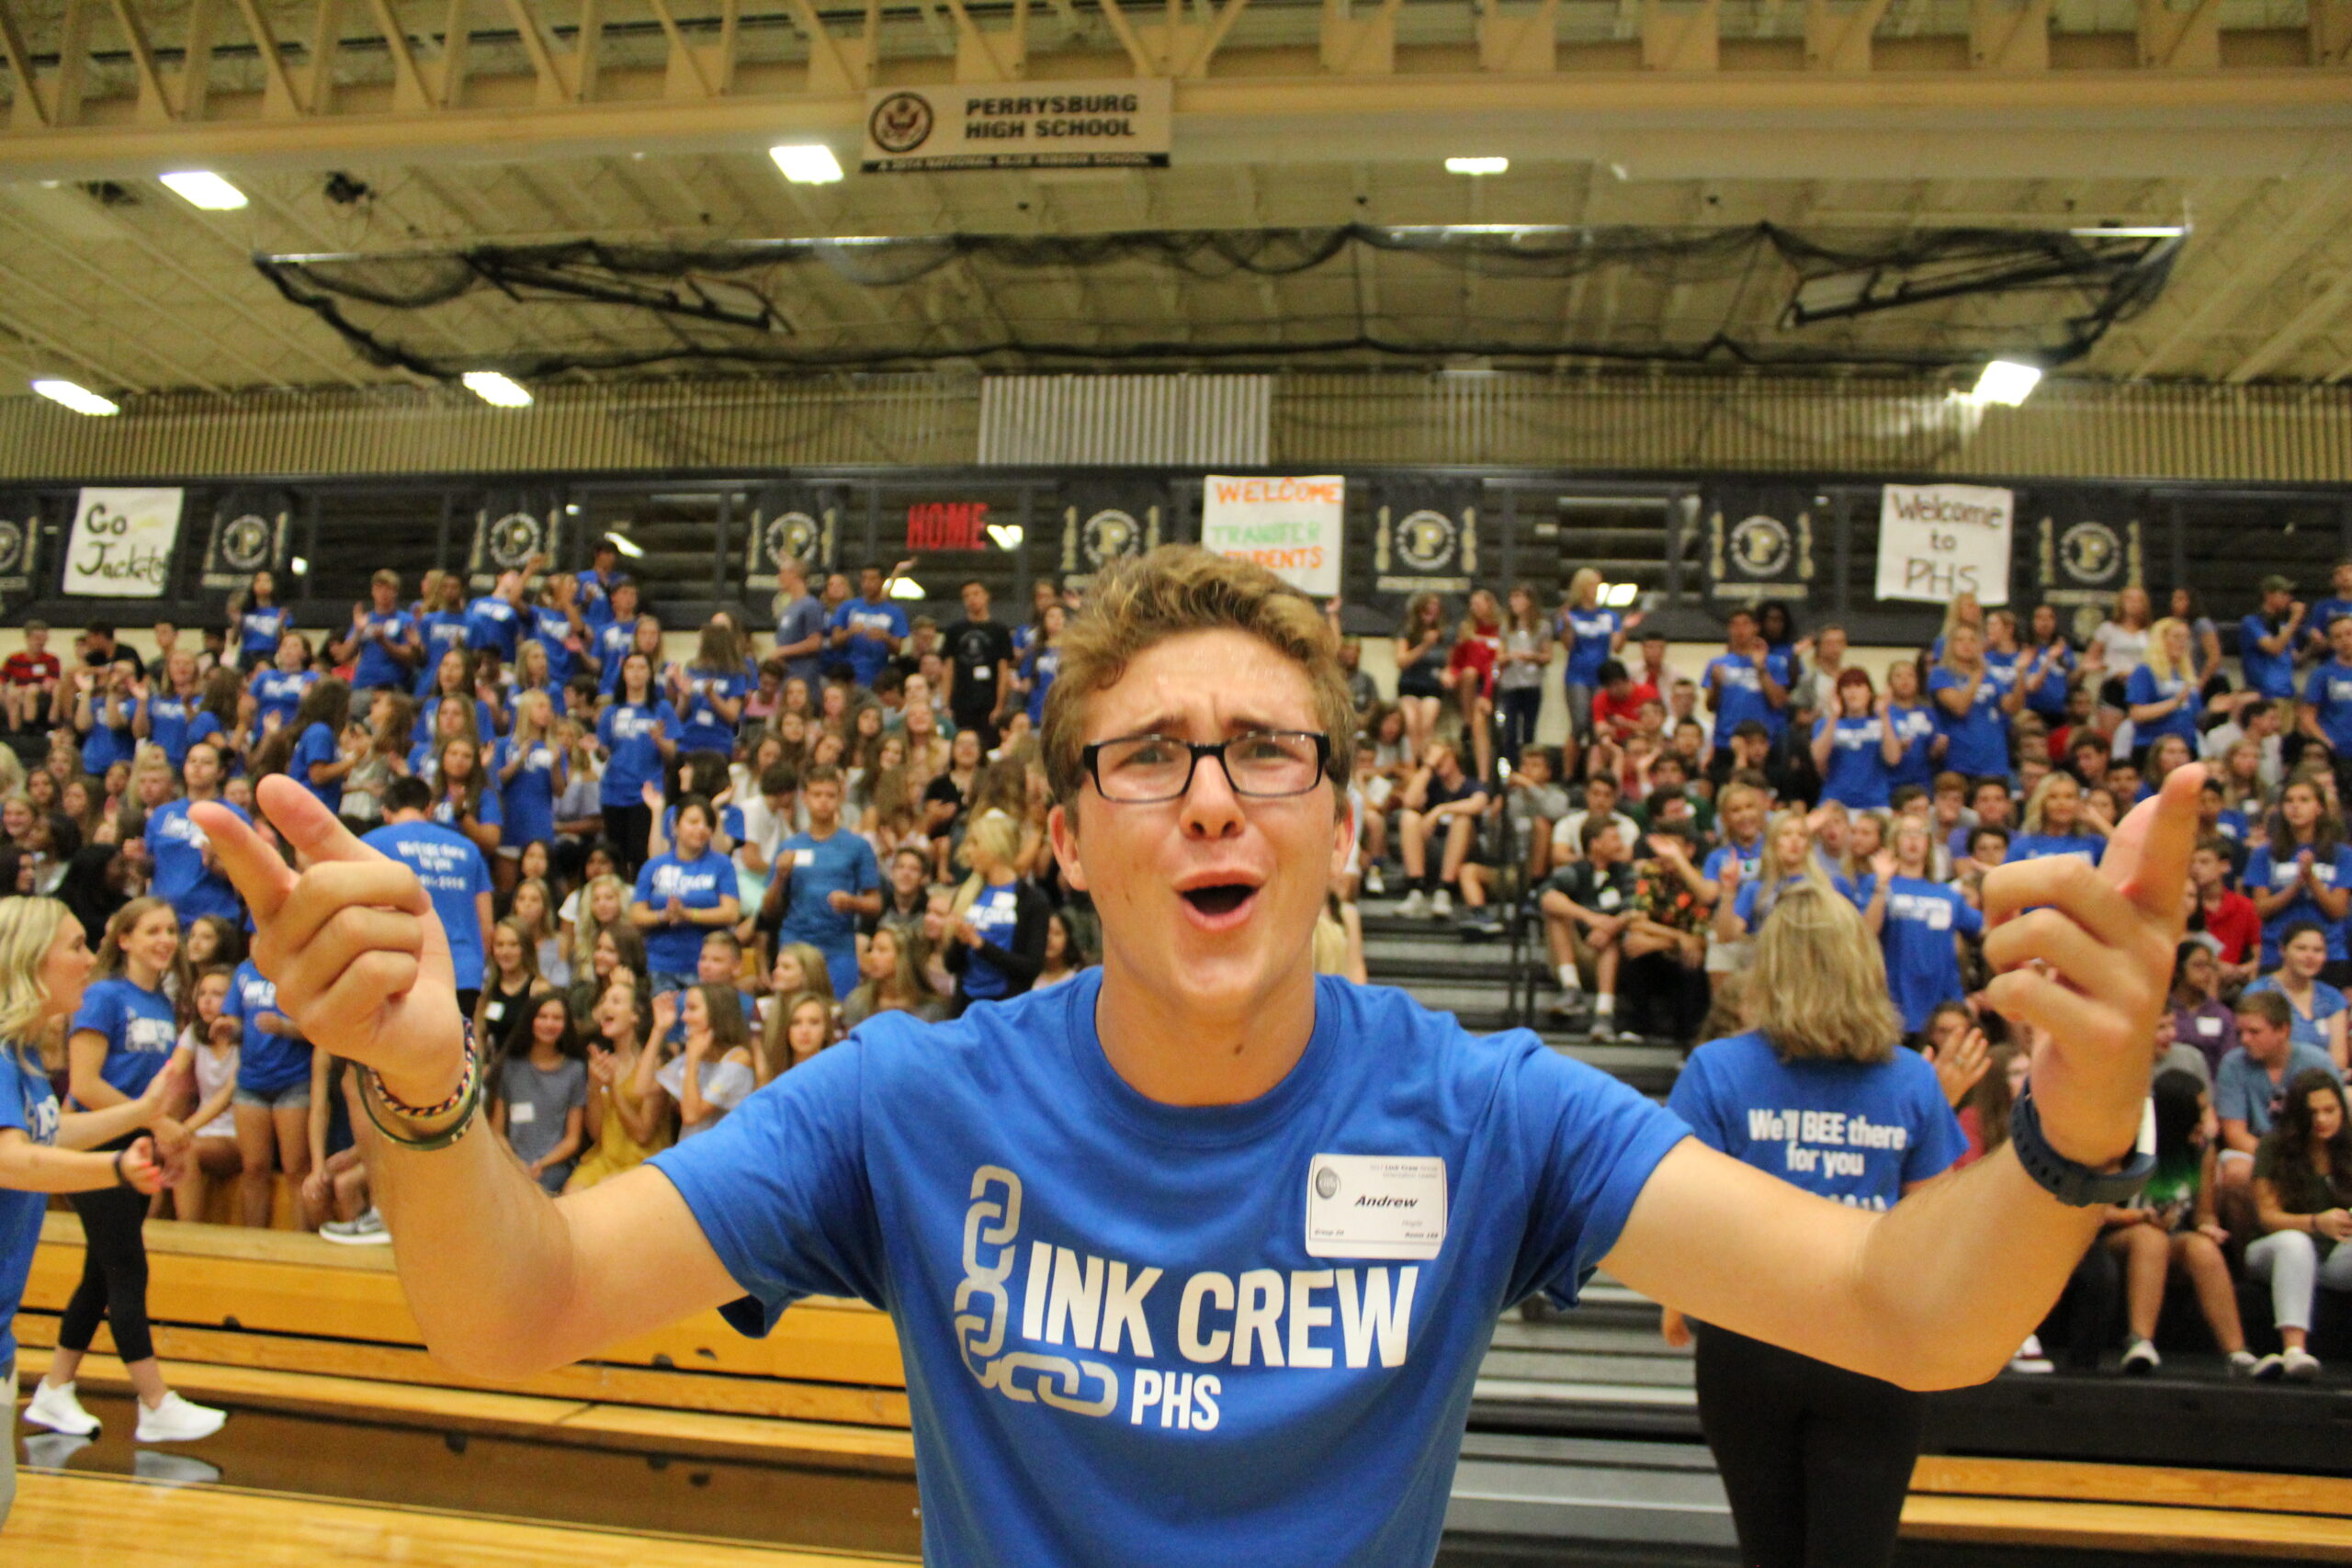 Link Crew Eases Transition to PHS For New Students